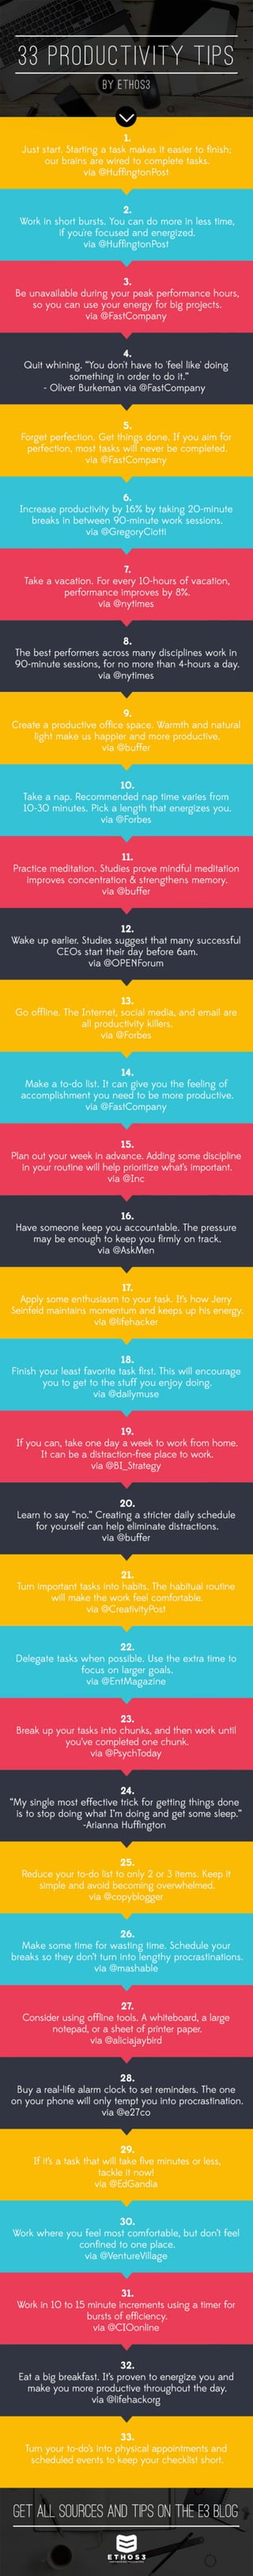 33 Productivity Tips, in 140 Characters or Less